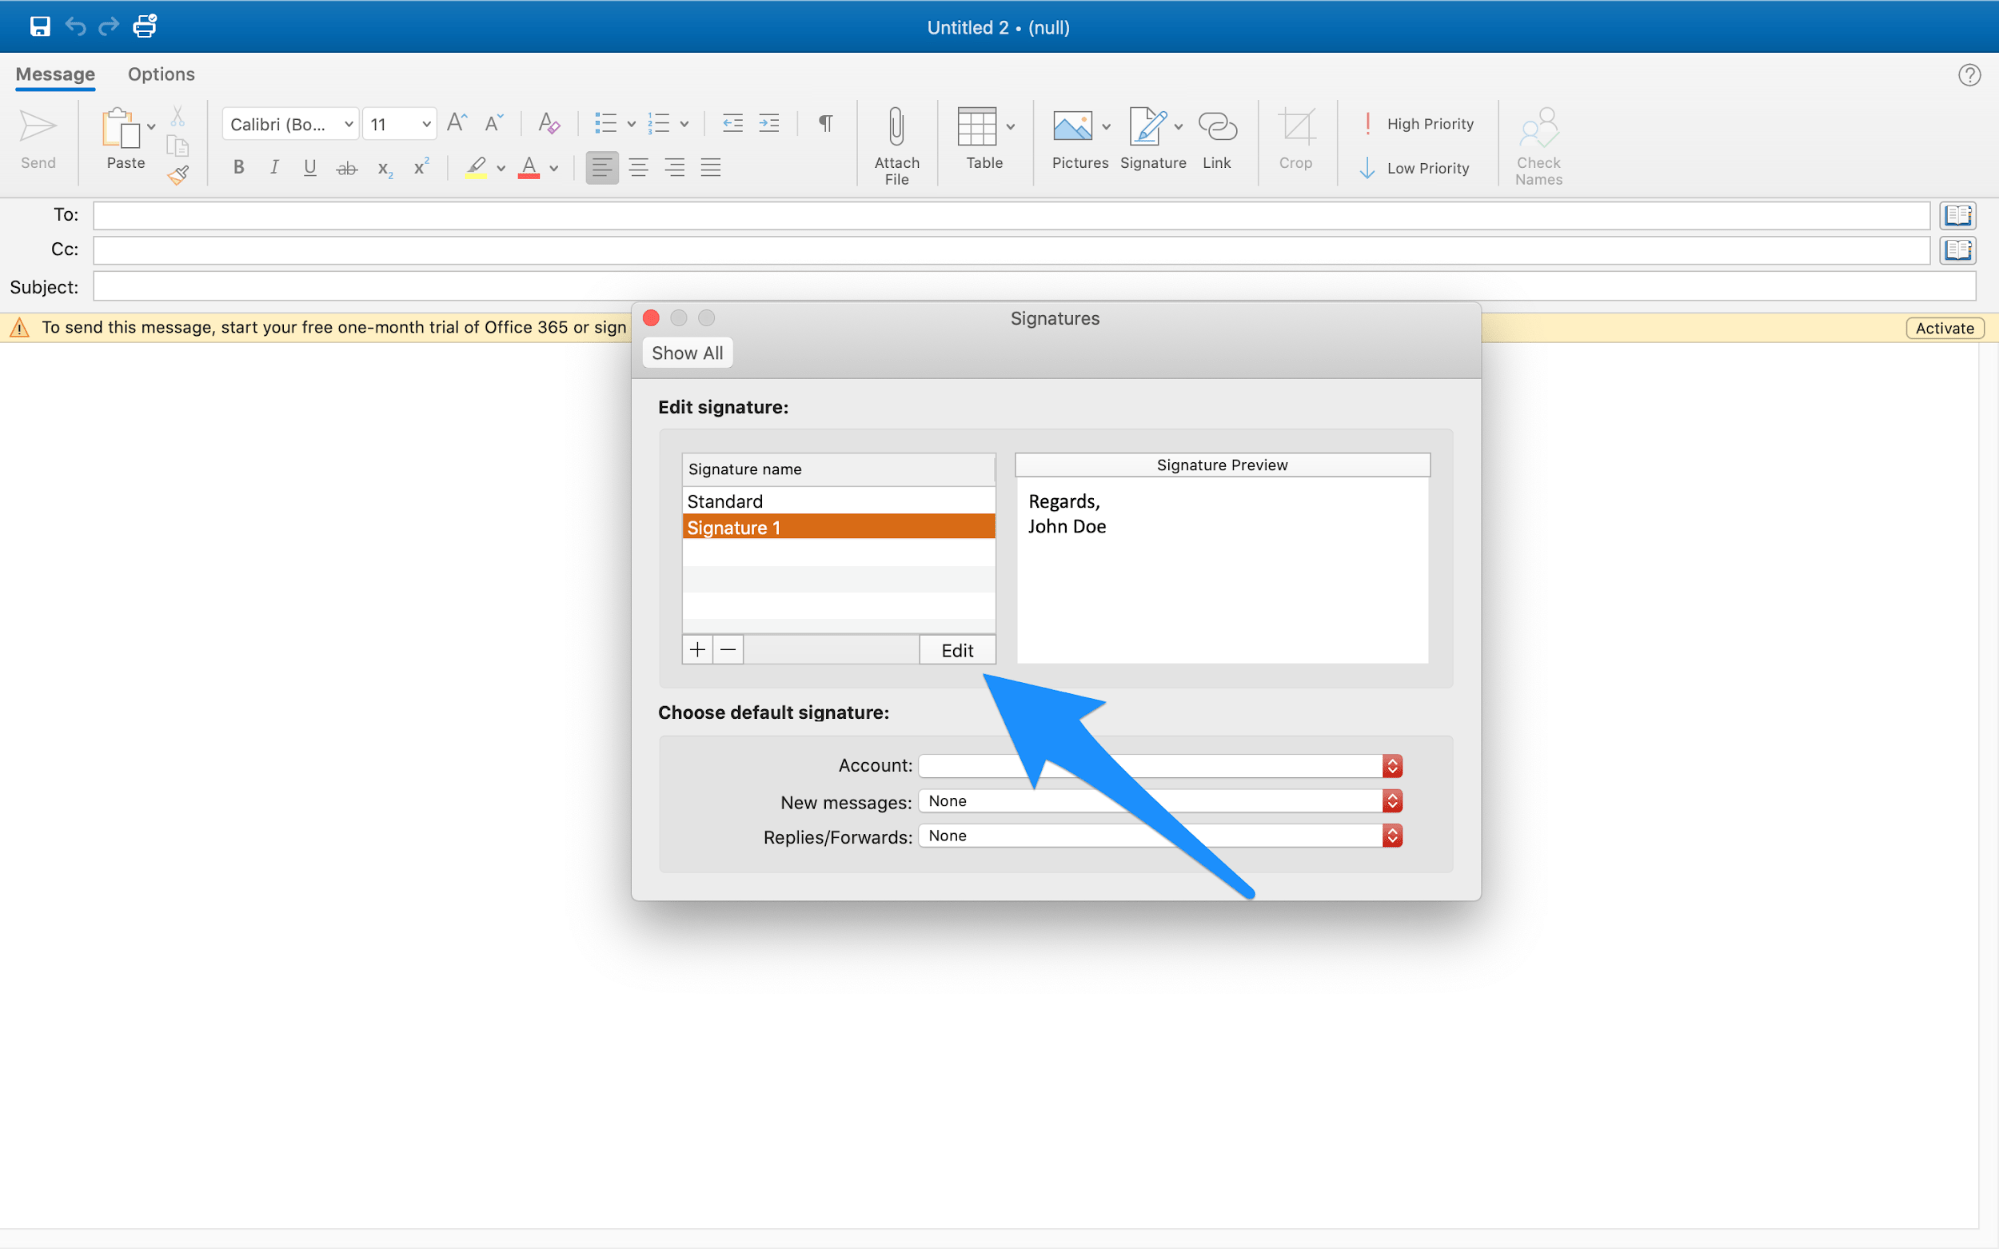 how to add signature in outlook inbox app